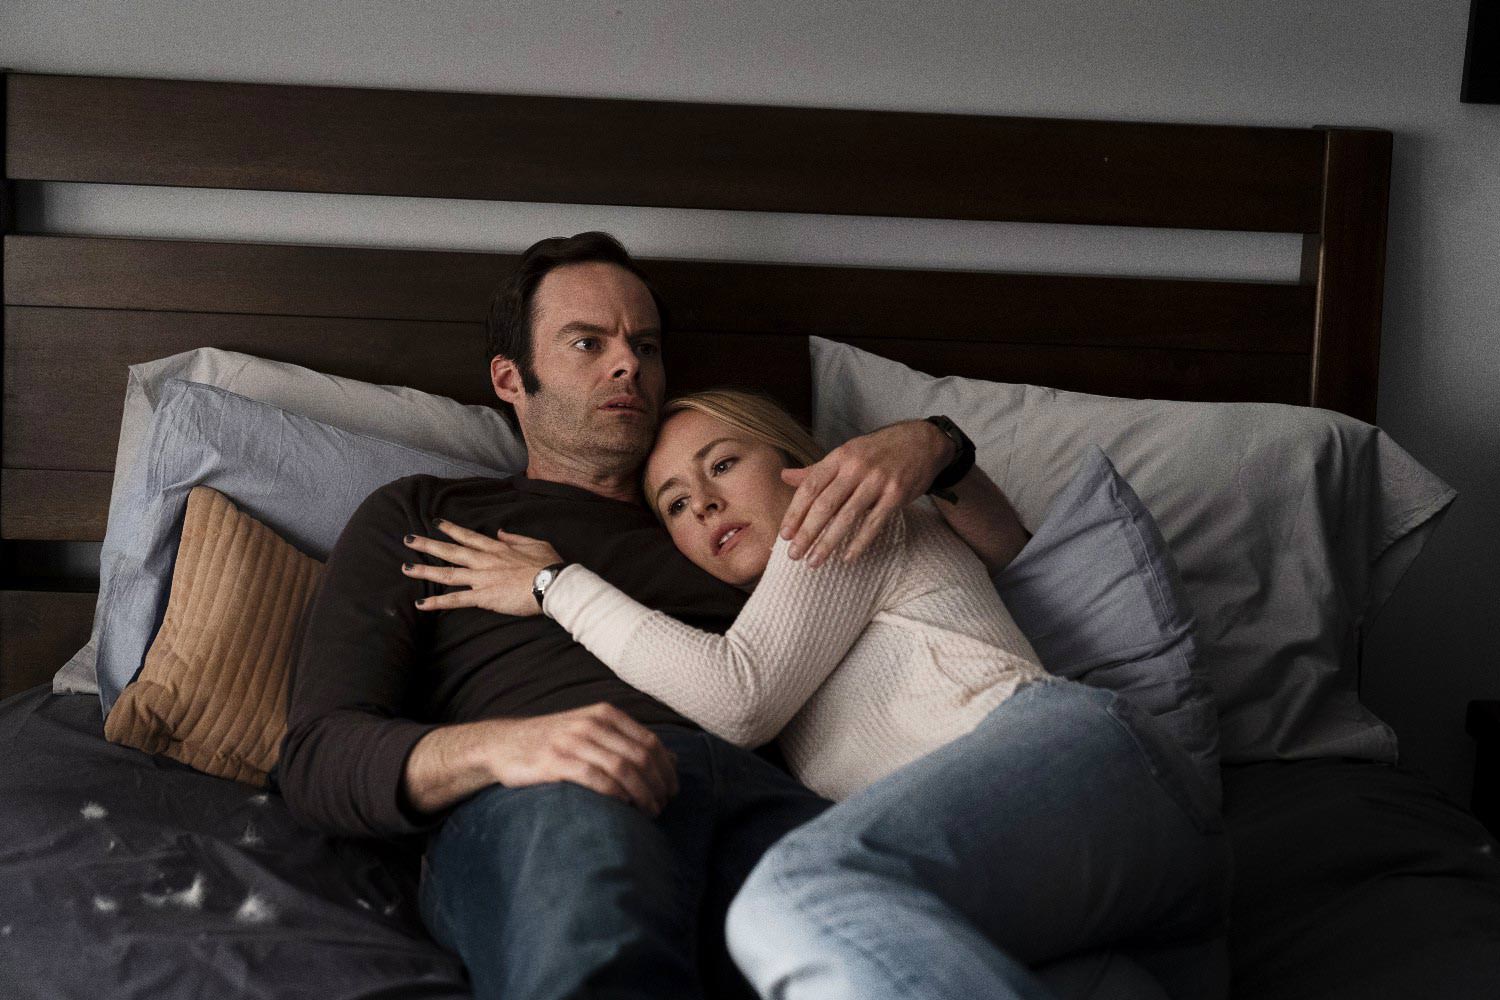 Barry Berkman and Sally Reed in Season 2, Episode 3: “Past = Present x Future Over Yesterday” - Pictured from left to right: Bill Hader and Sarah Goldberg - Photo Credit: Isabella Vosmikova / HBO